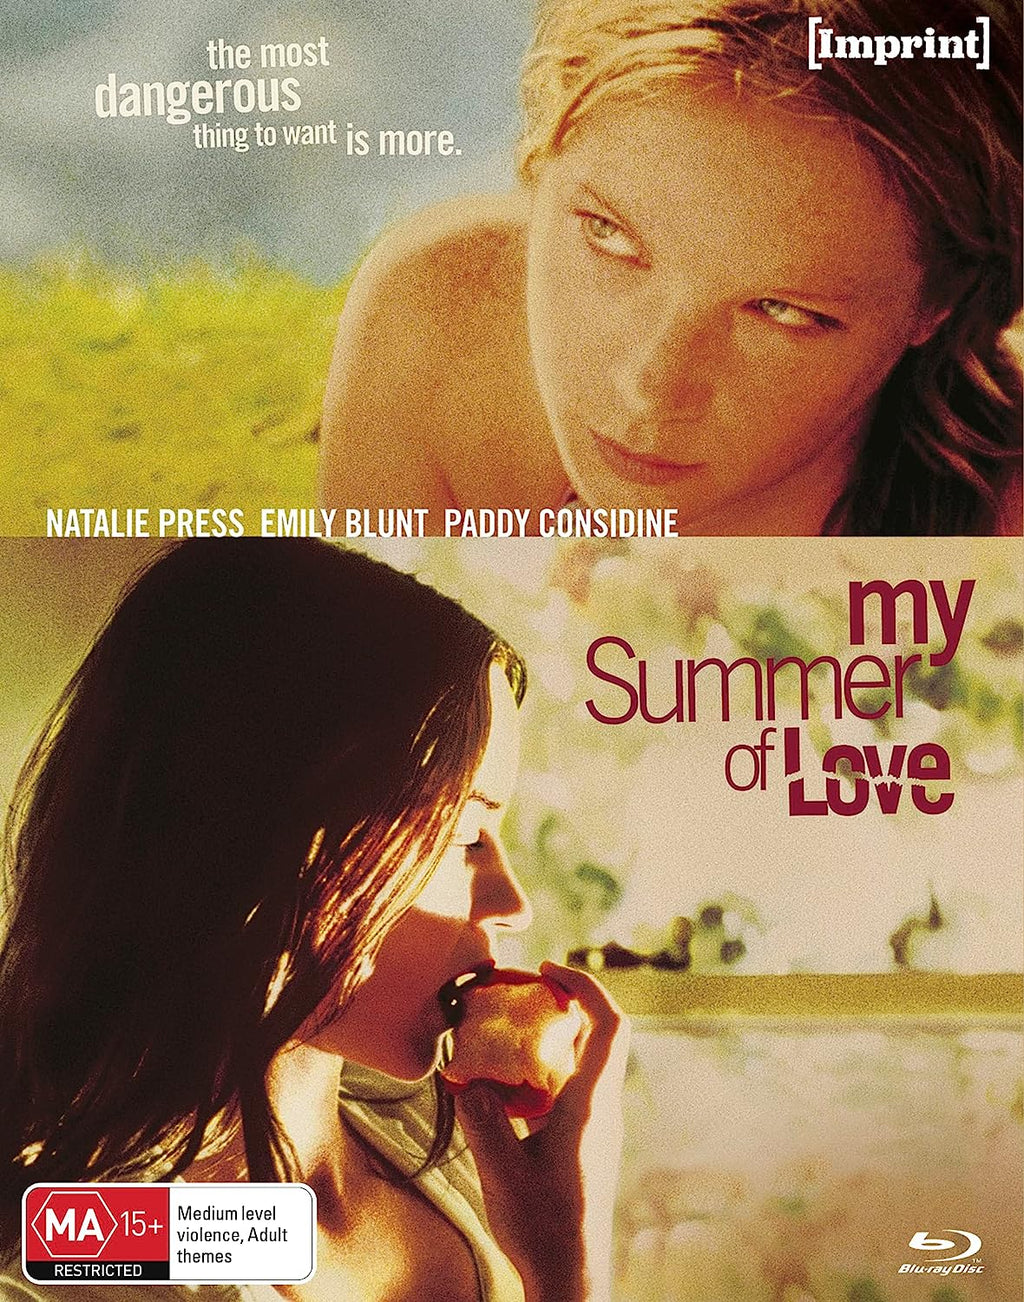 IMPORT　(REGION　OF　FREE　EDITION)　SUMMER　LIMITED　LOVE　MY　BLU-RAY